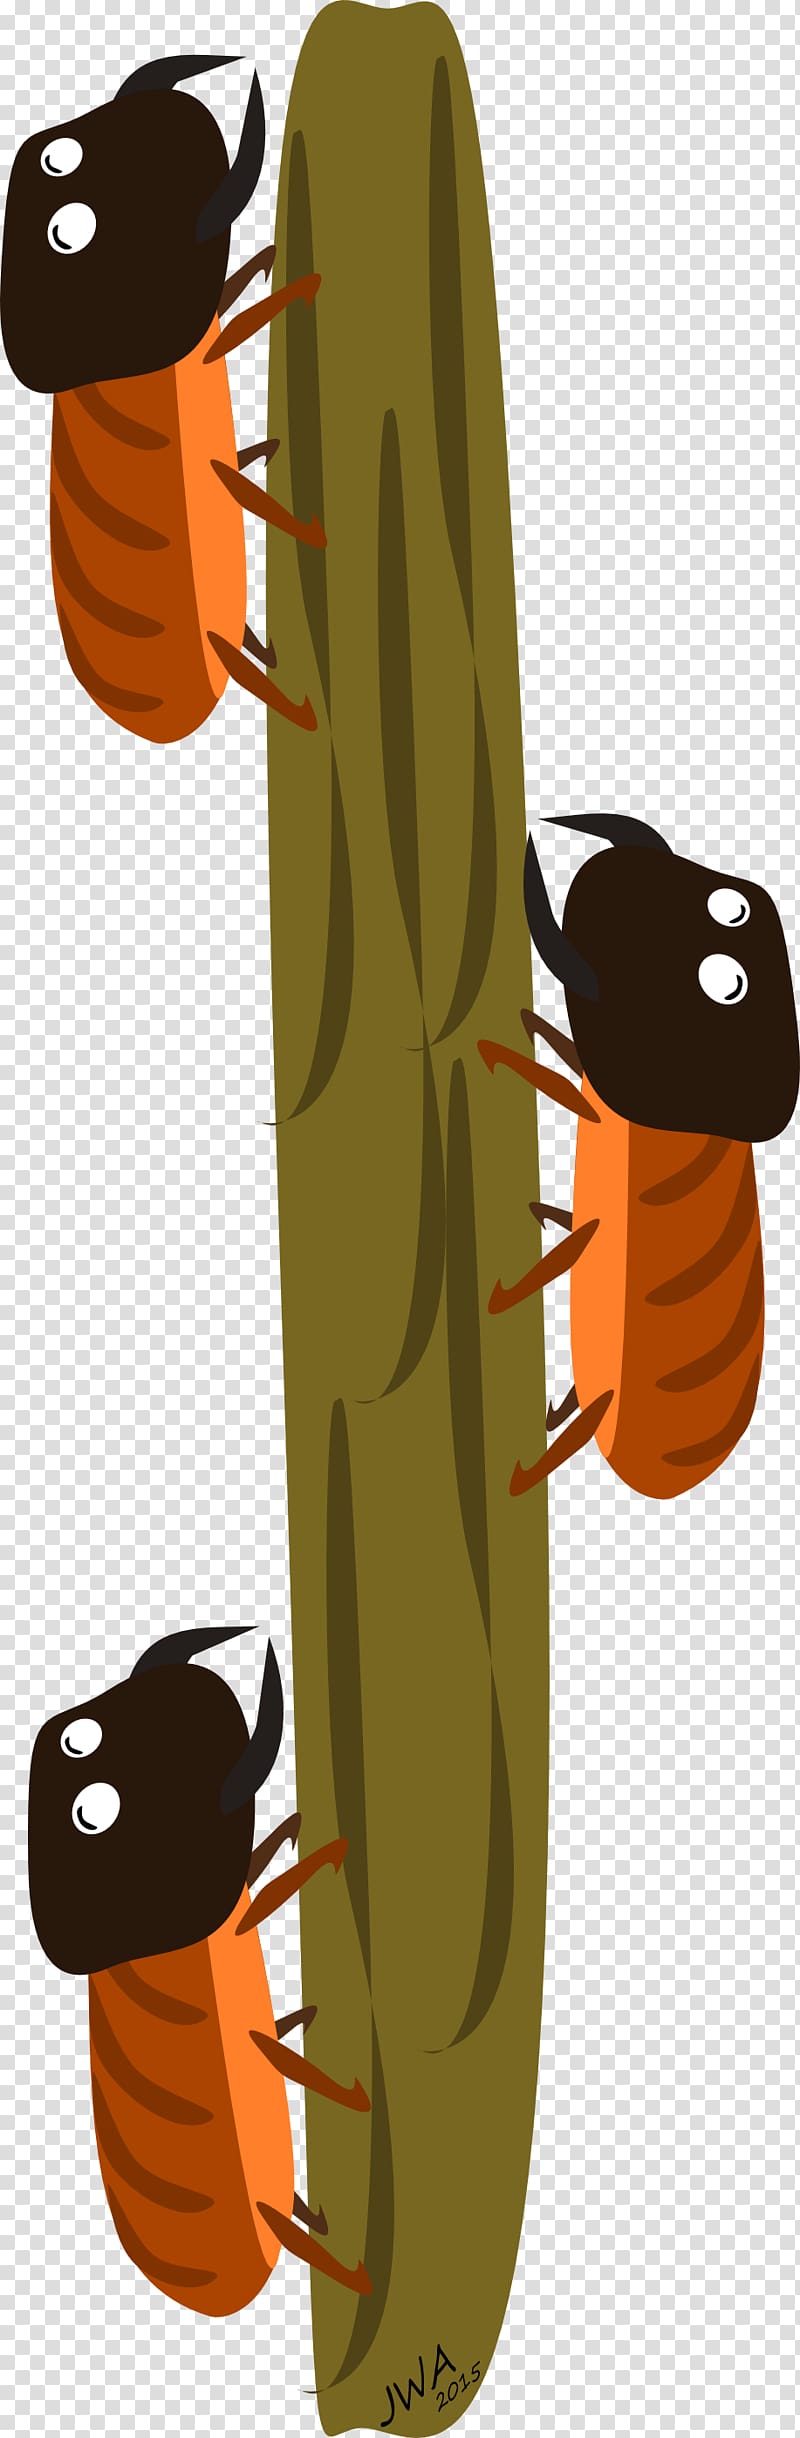 Mound-building termites Ant , others transparent background PNG clipart